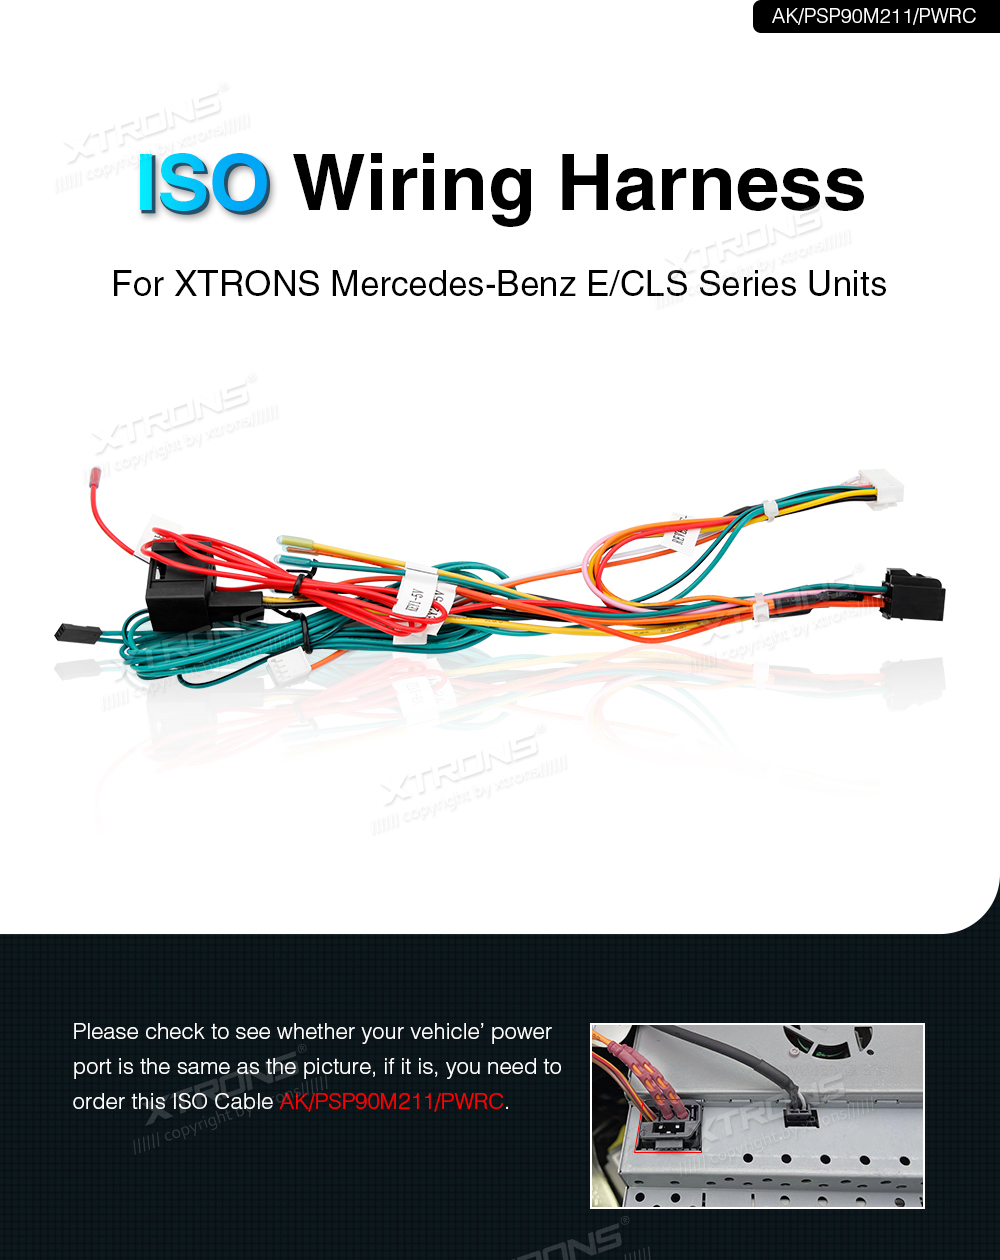 ISO Wiring Harness for XTRONS Mercedes-Benz E / CLS Series Units PSP90M211/PWRC